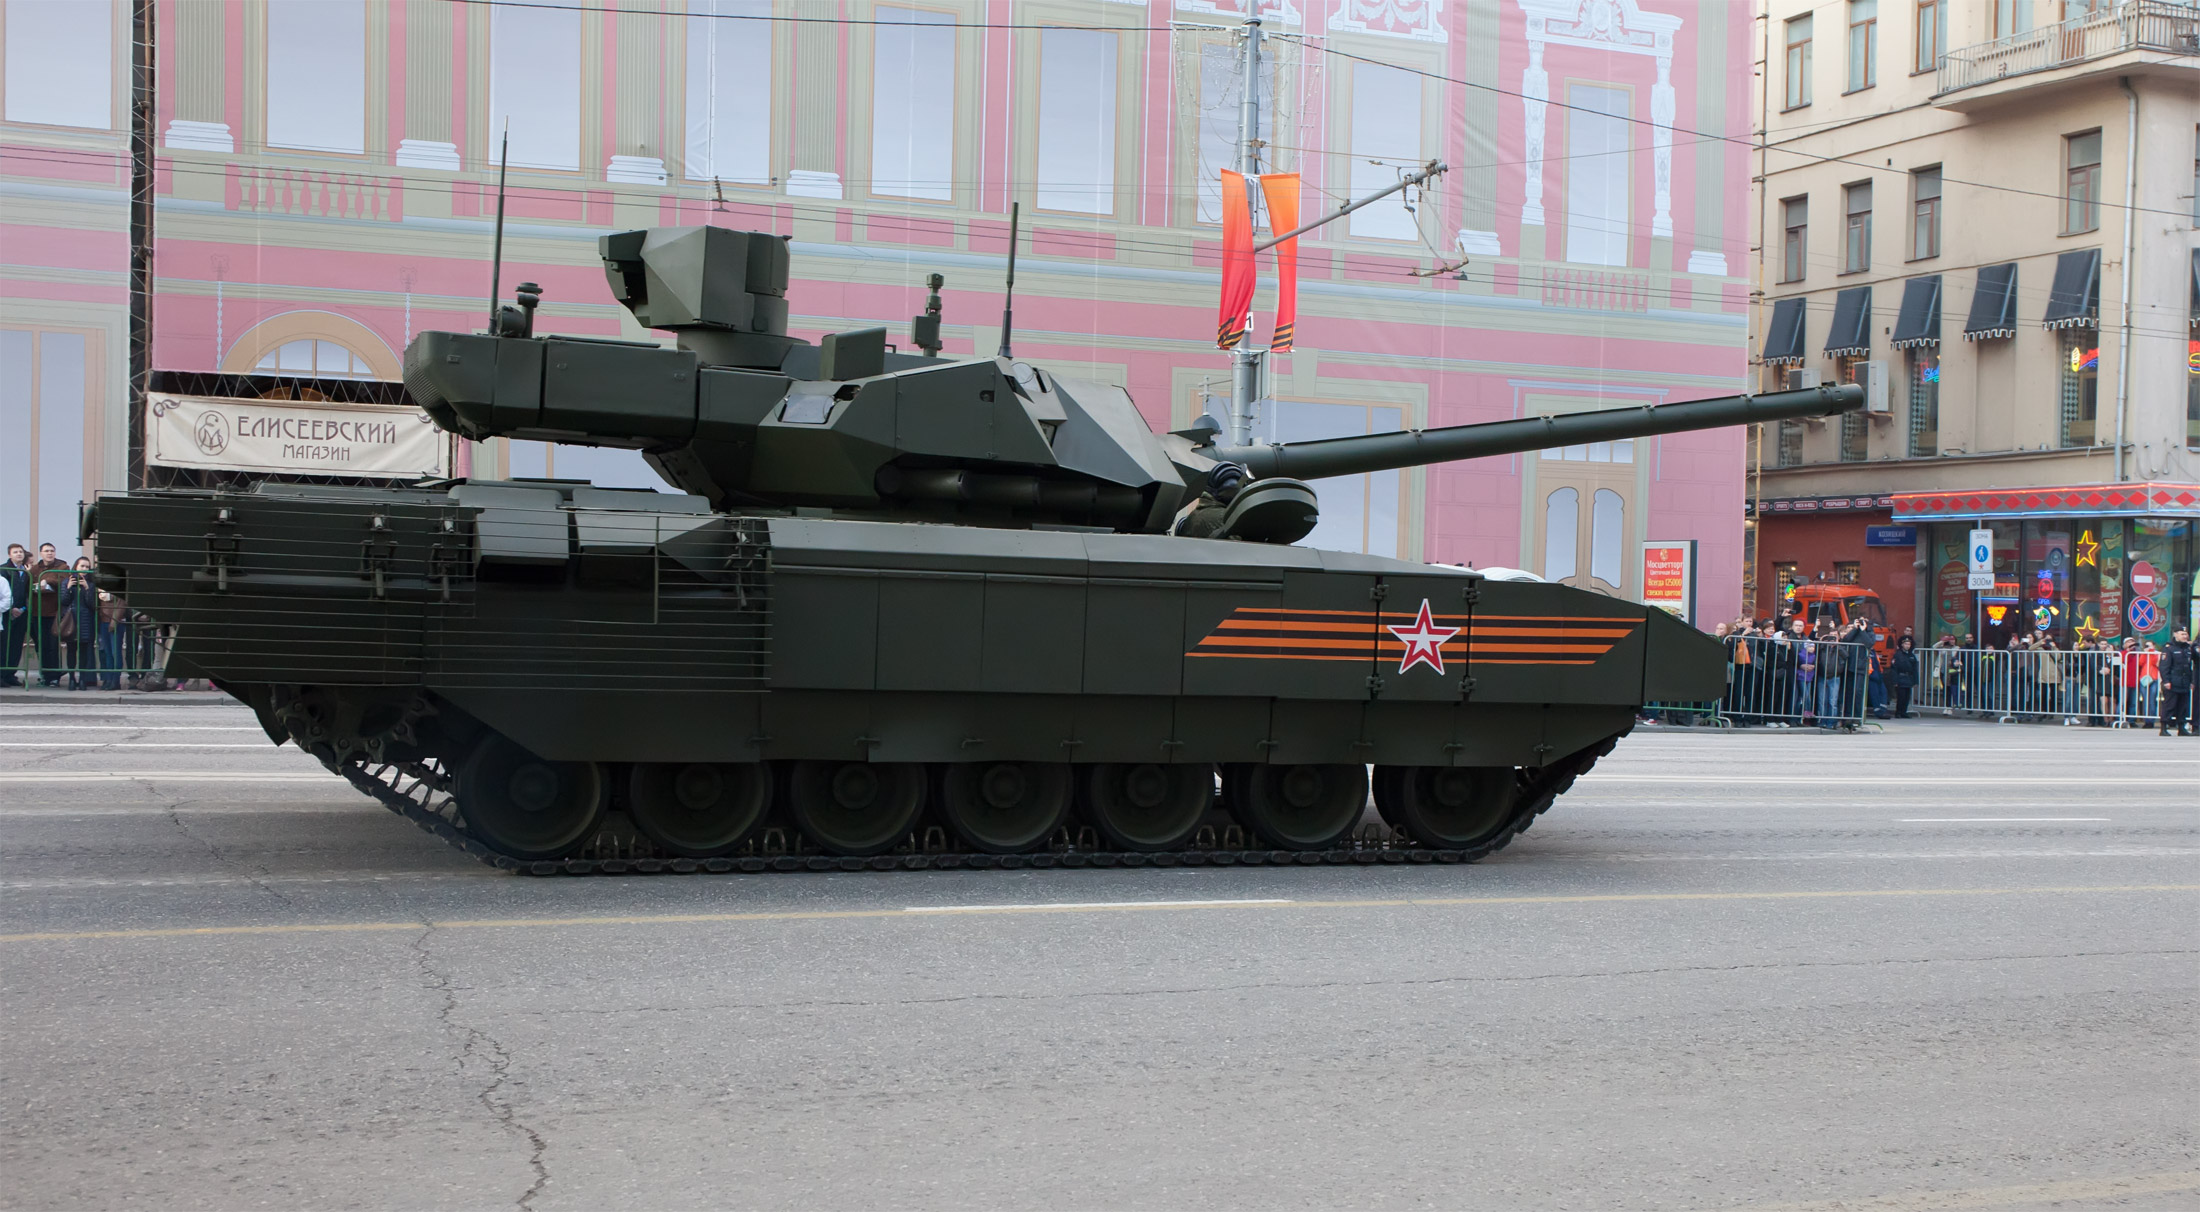 T 3 t 14 0. Танк Армата т-14. T 14 Армата танк. T14 Армата. T14 танк Armata.